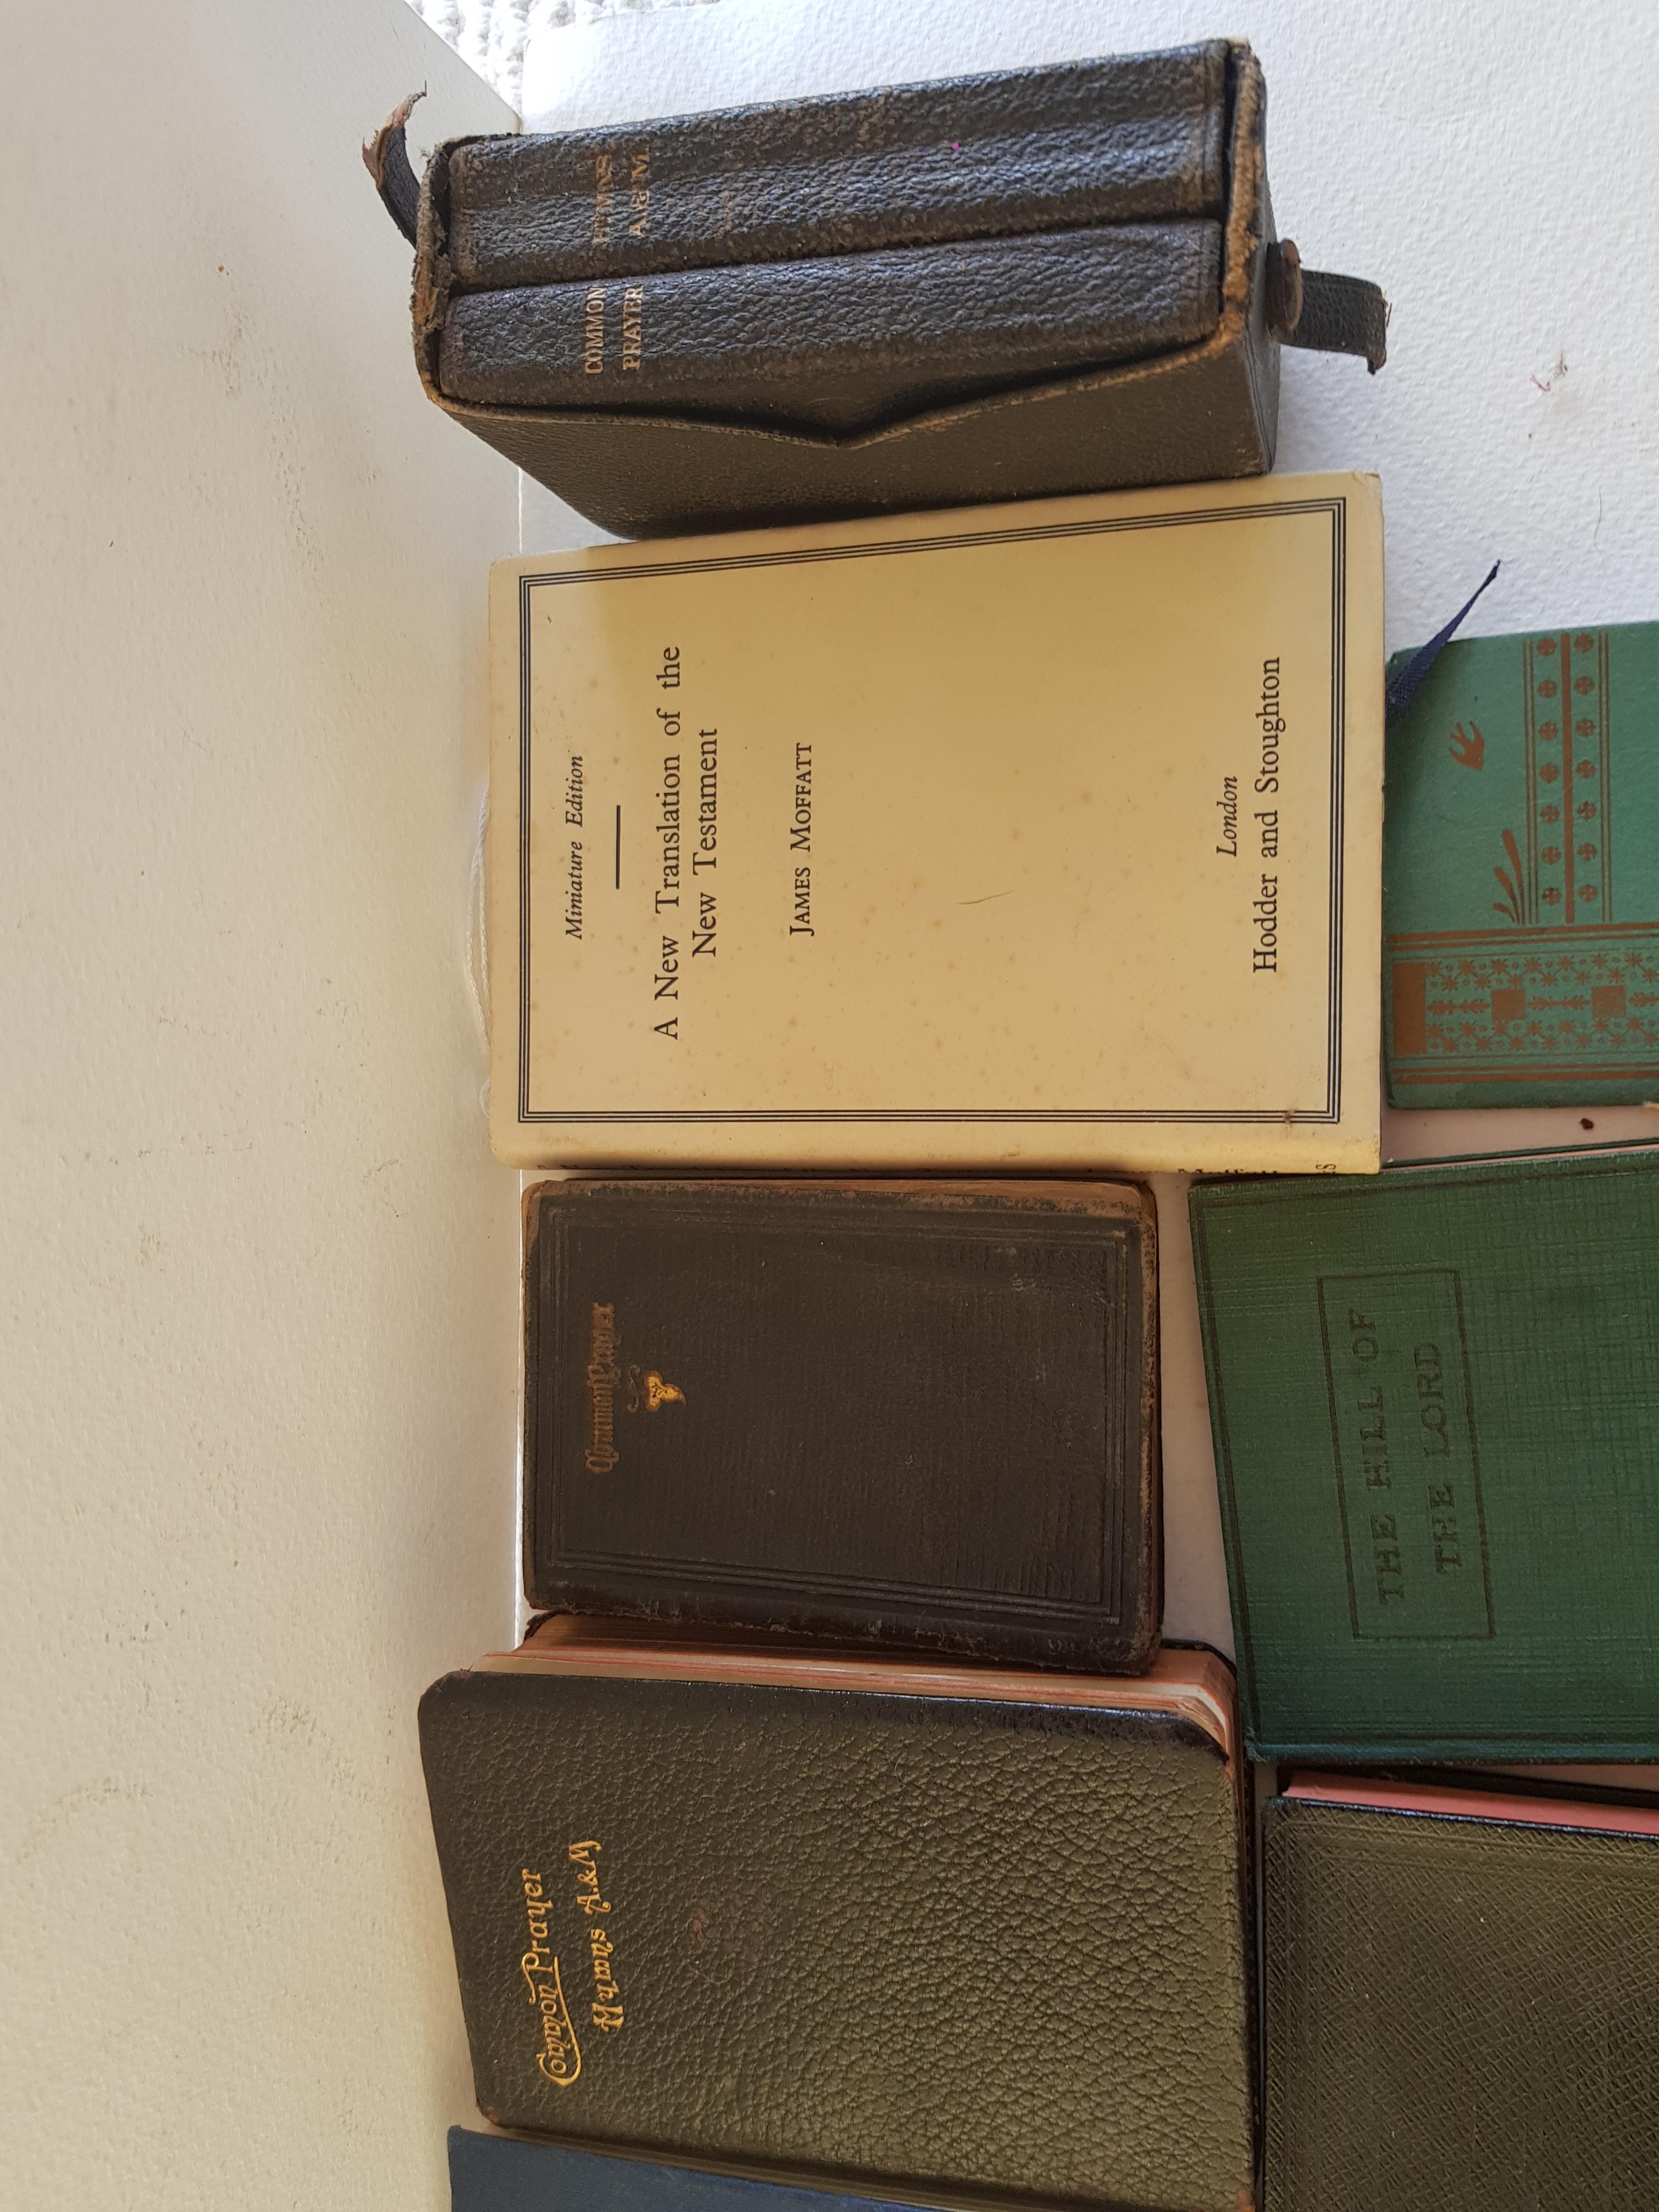 Pocket size Religious books dating from 1870 - Image 3 of 3